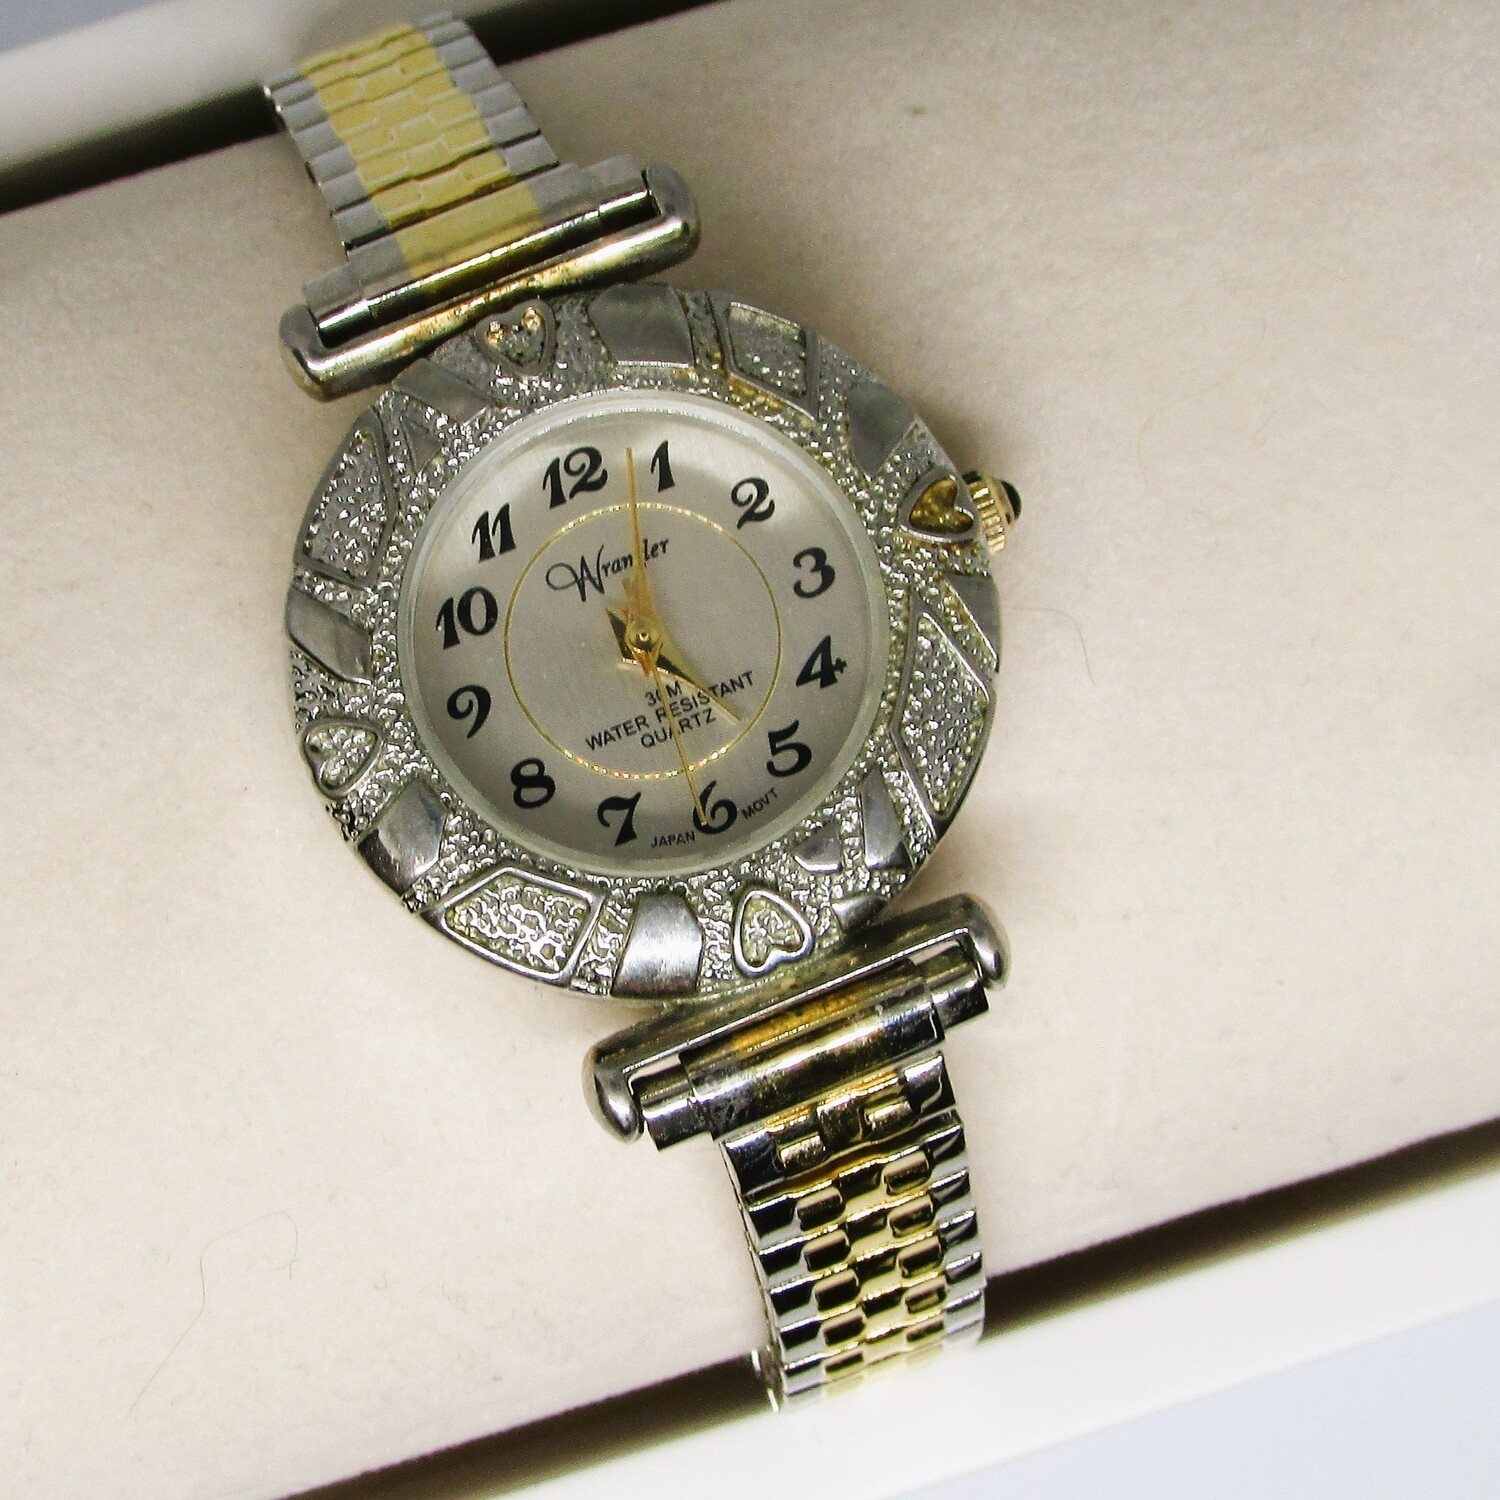 Wrangler's Gold and Silver Toned Water-Resistant Quartz Watch c. 1990's